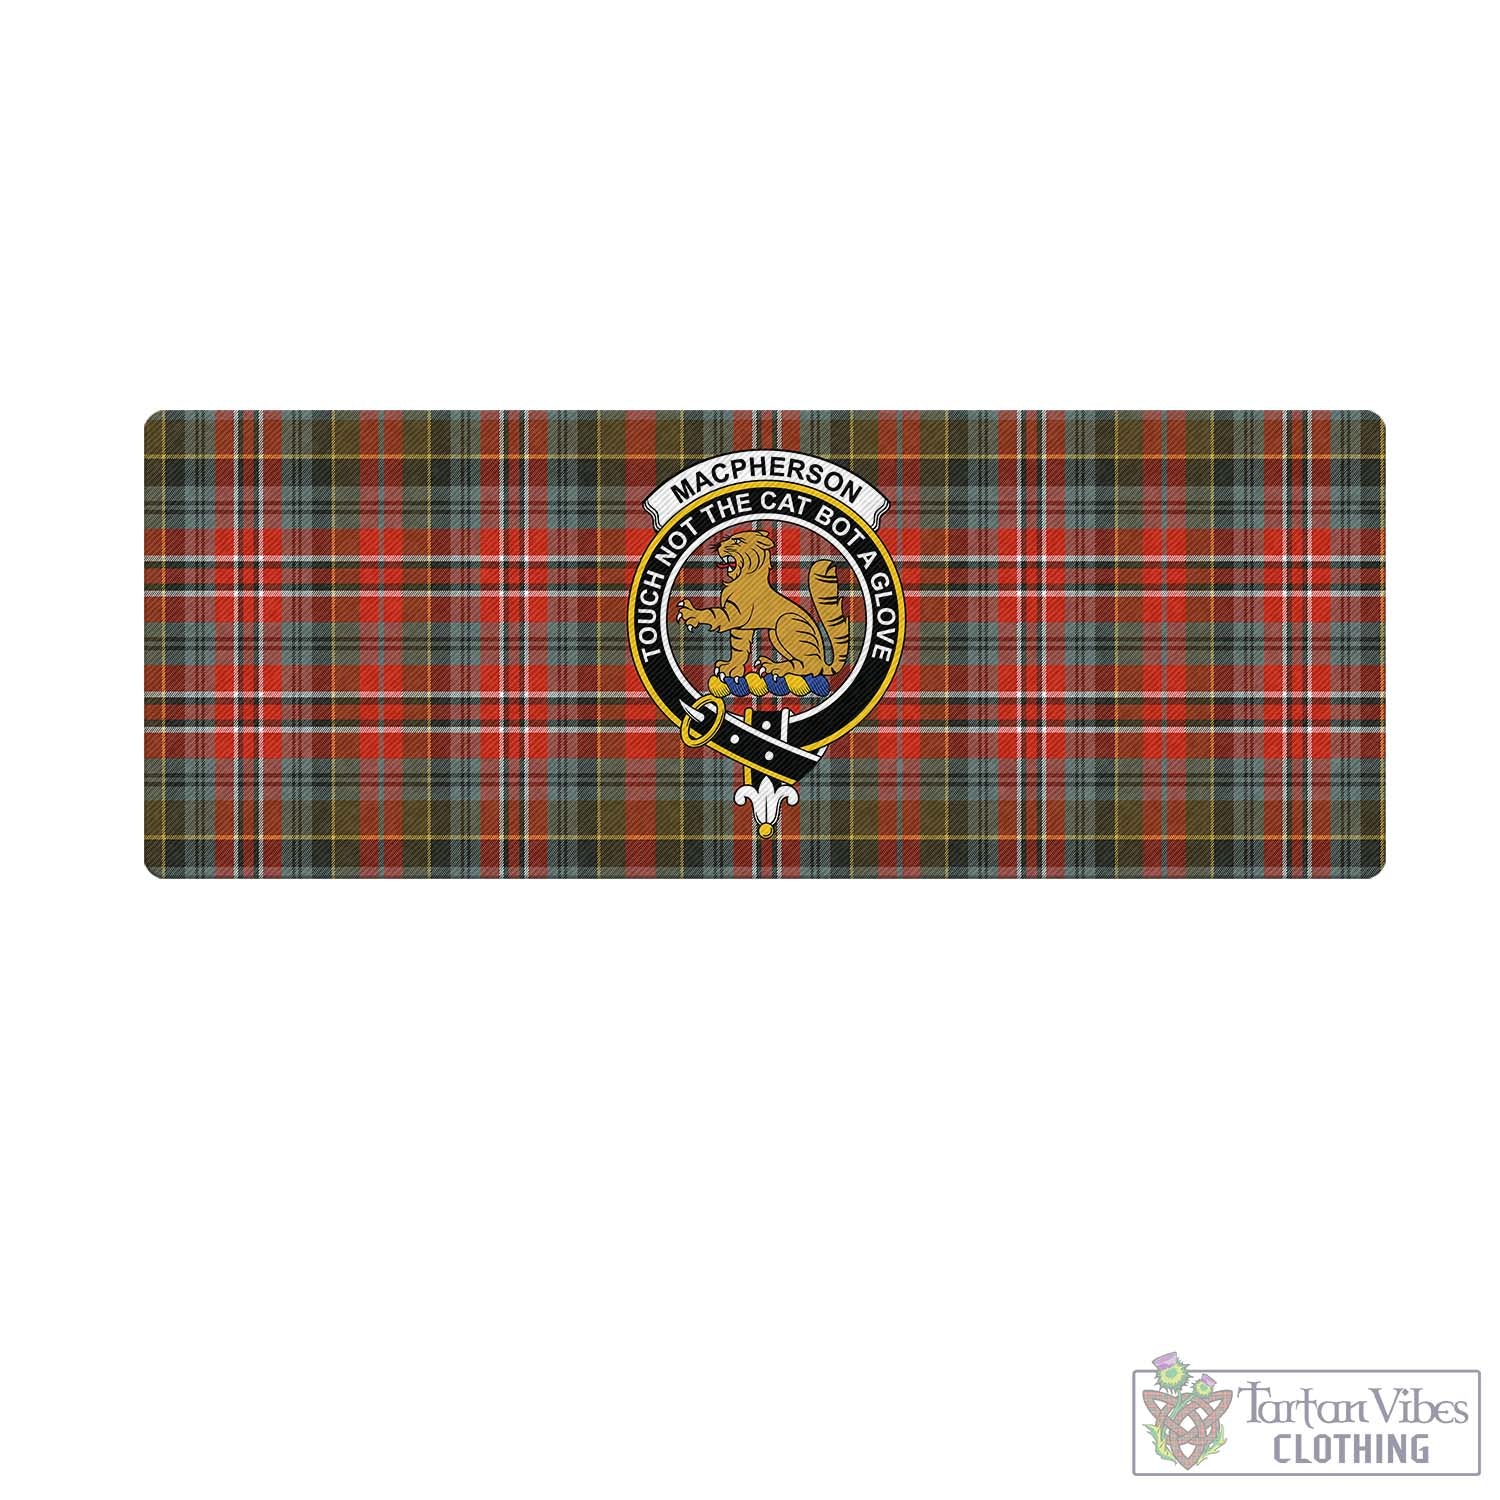 Tartan Vibes Clothing MacPherson Weathered Tartan Mouse Pad with Family Crest